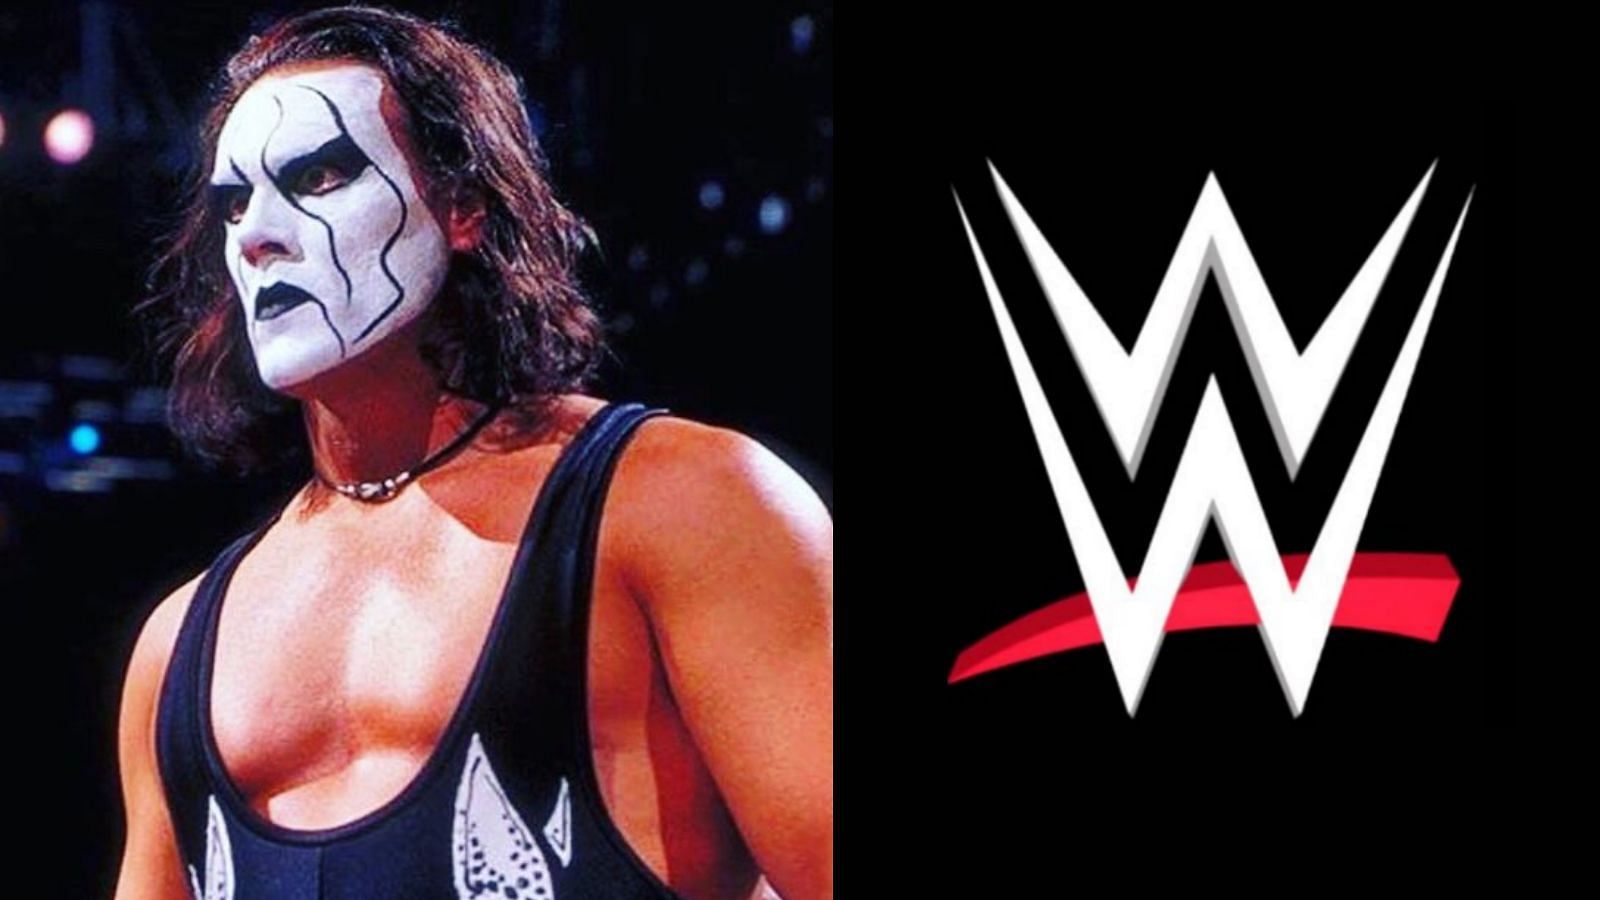 The Icon has stepped into the ring with many legendary wrestlers.